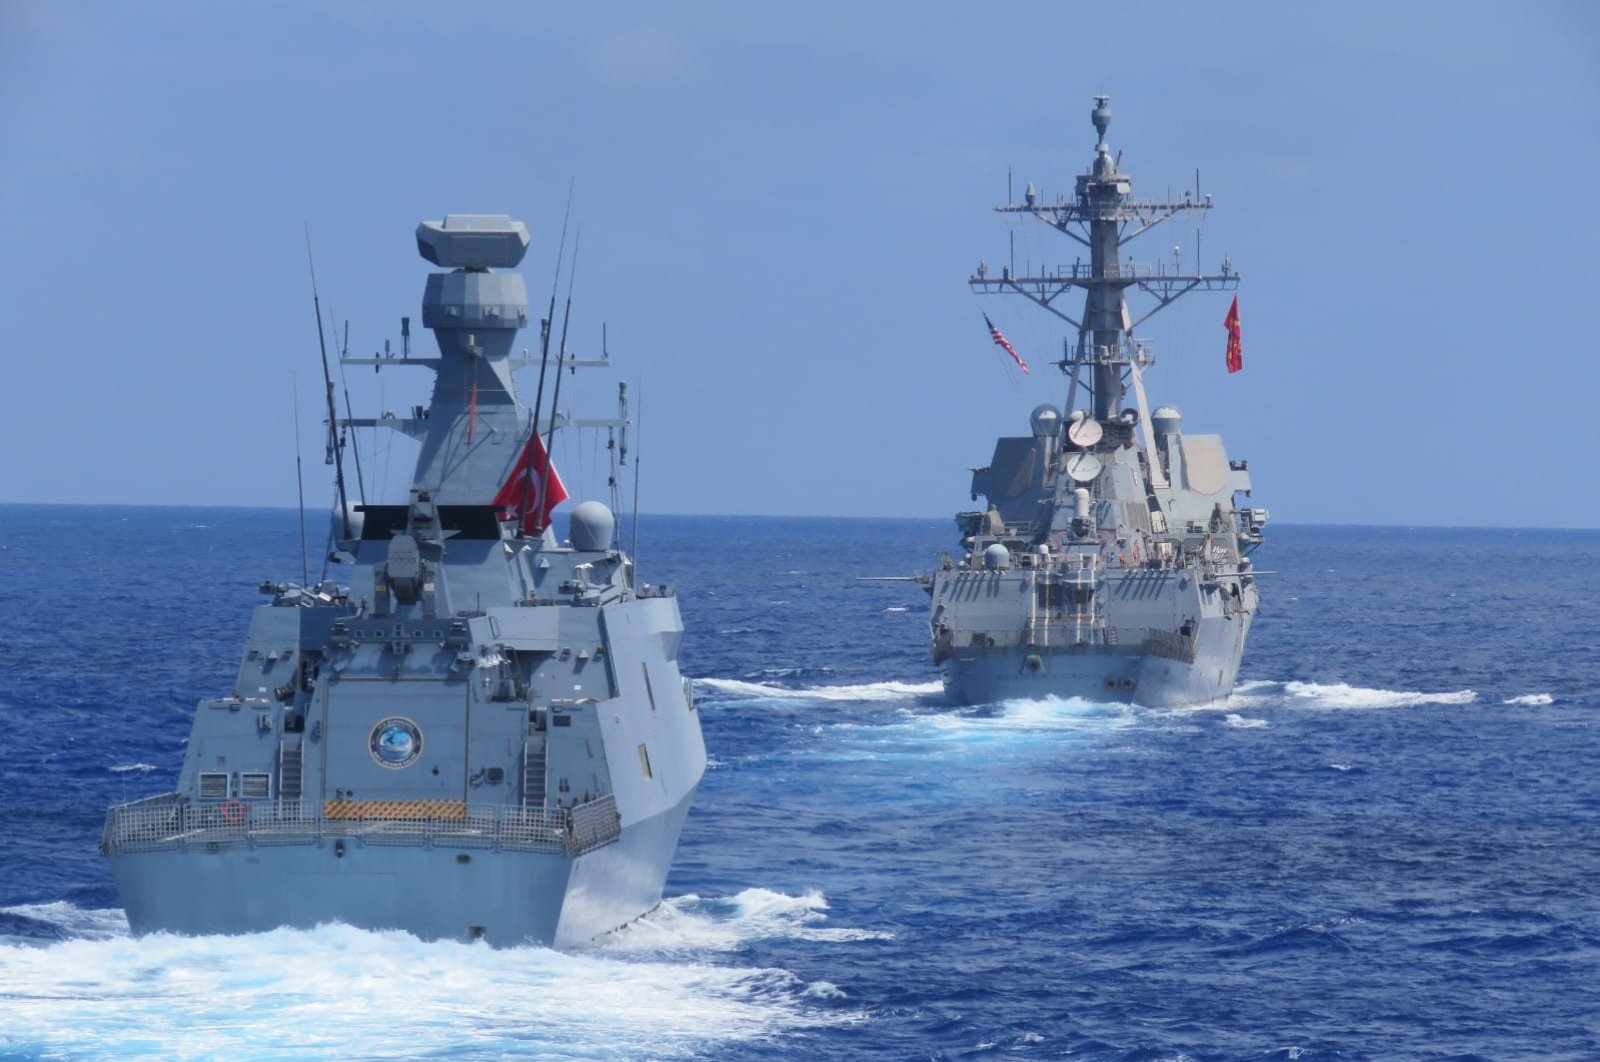 US destroyer USS Winston S. Churchill, rear, along with Turkish frigate TCG Barbaros conduct maritime trainings in the Eastern Mediterranean, Aug. 26, 2020. (AP Photo)